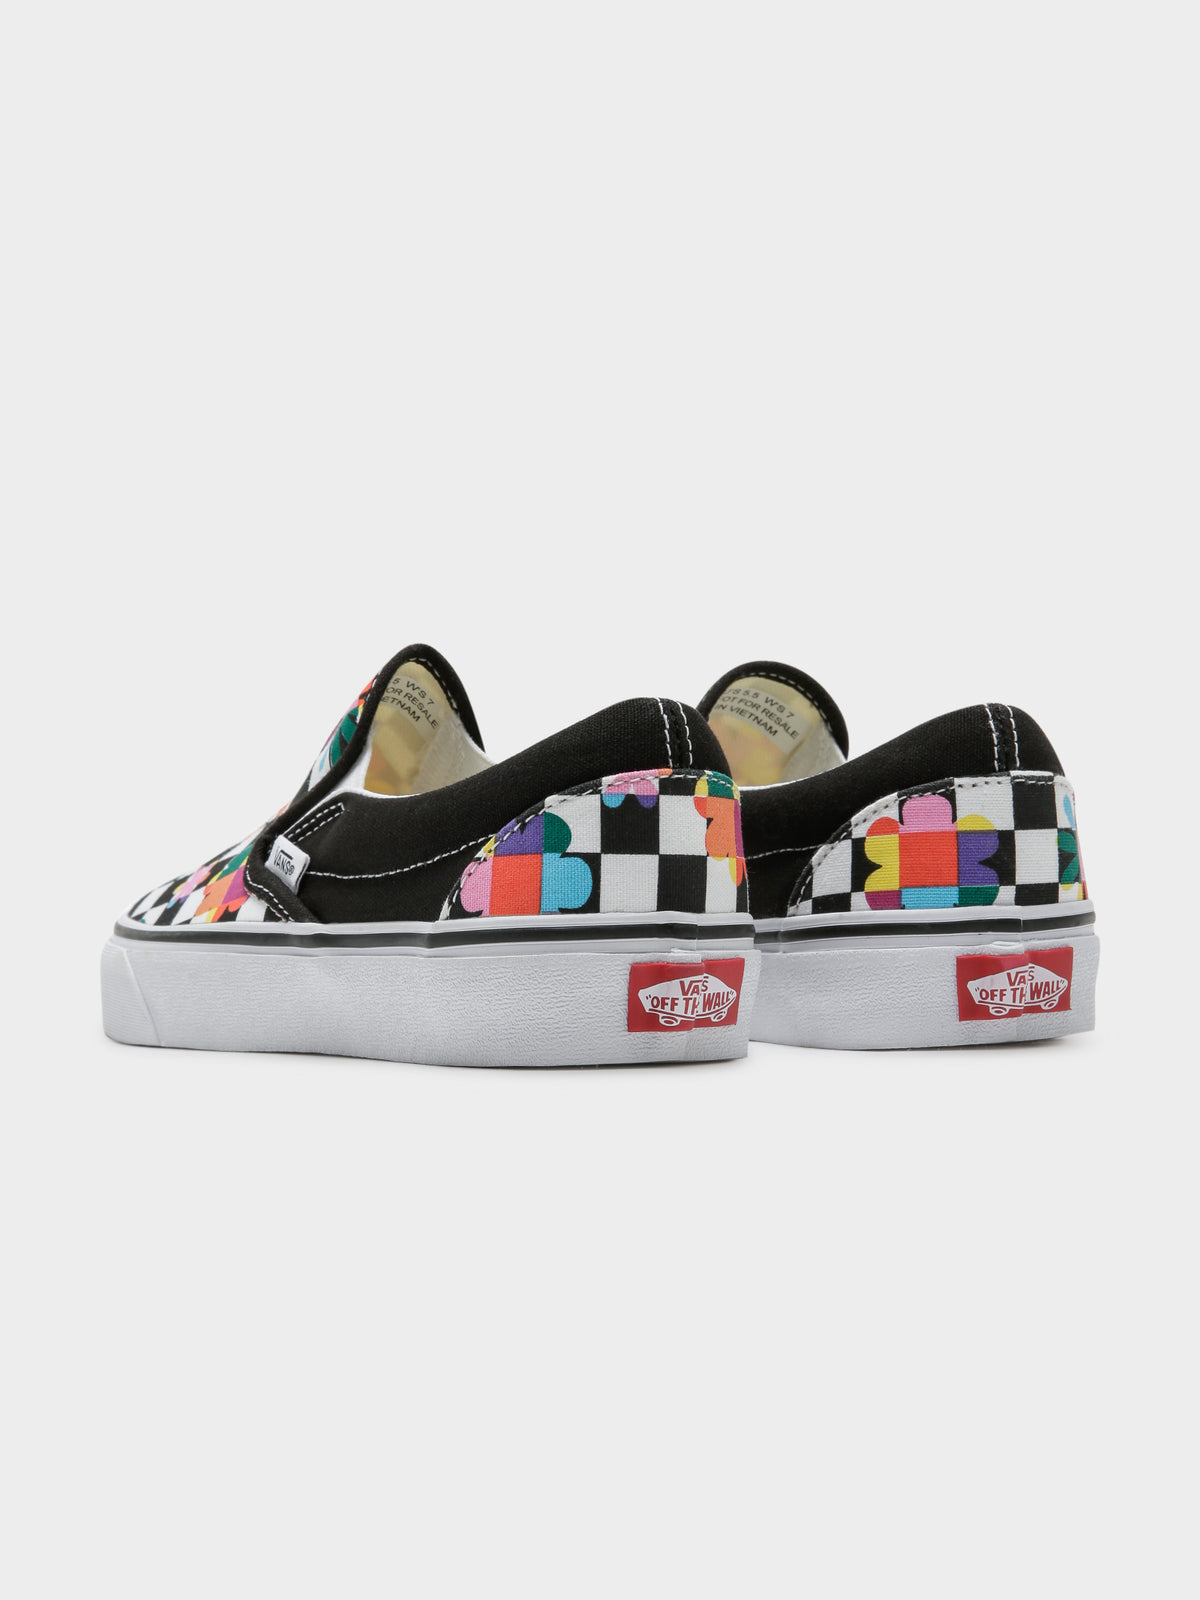 Unisex Classic Slip On sneakers in Floral Checkerboard